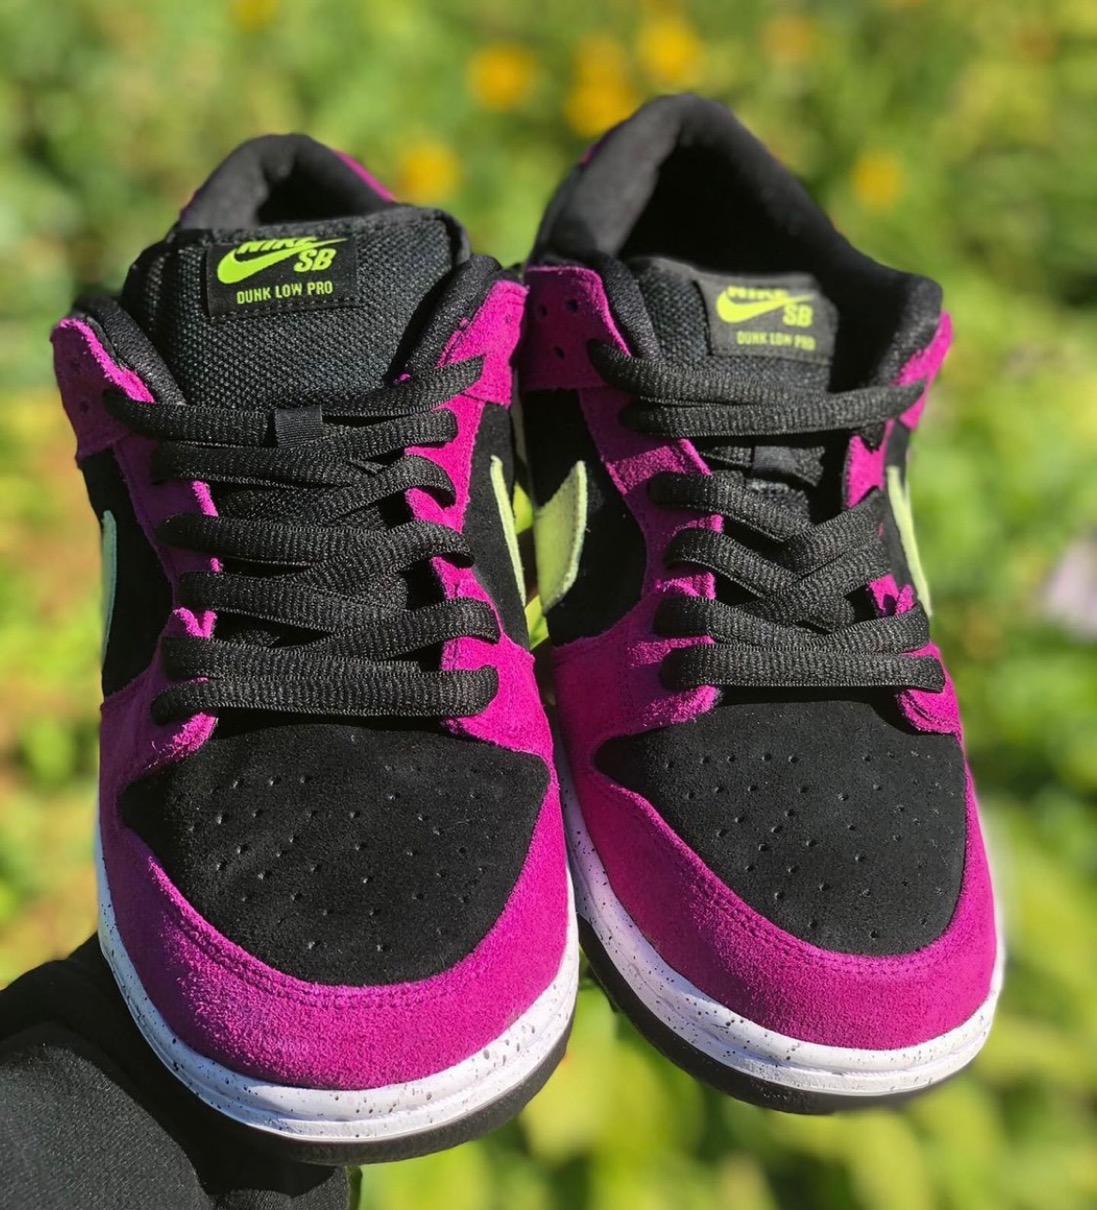 Nike SB】Dunk Low Pro “Red Plum”が国内8月23日に発売予定 | UP TO DATE